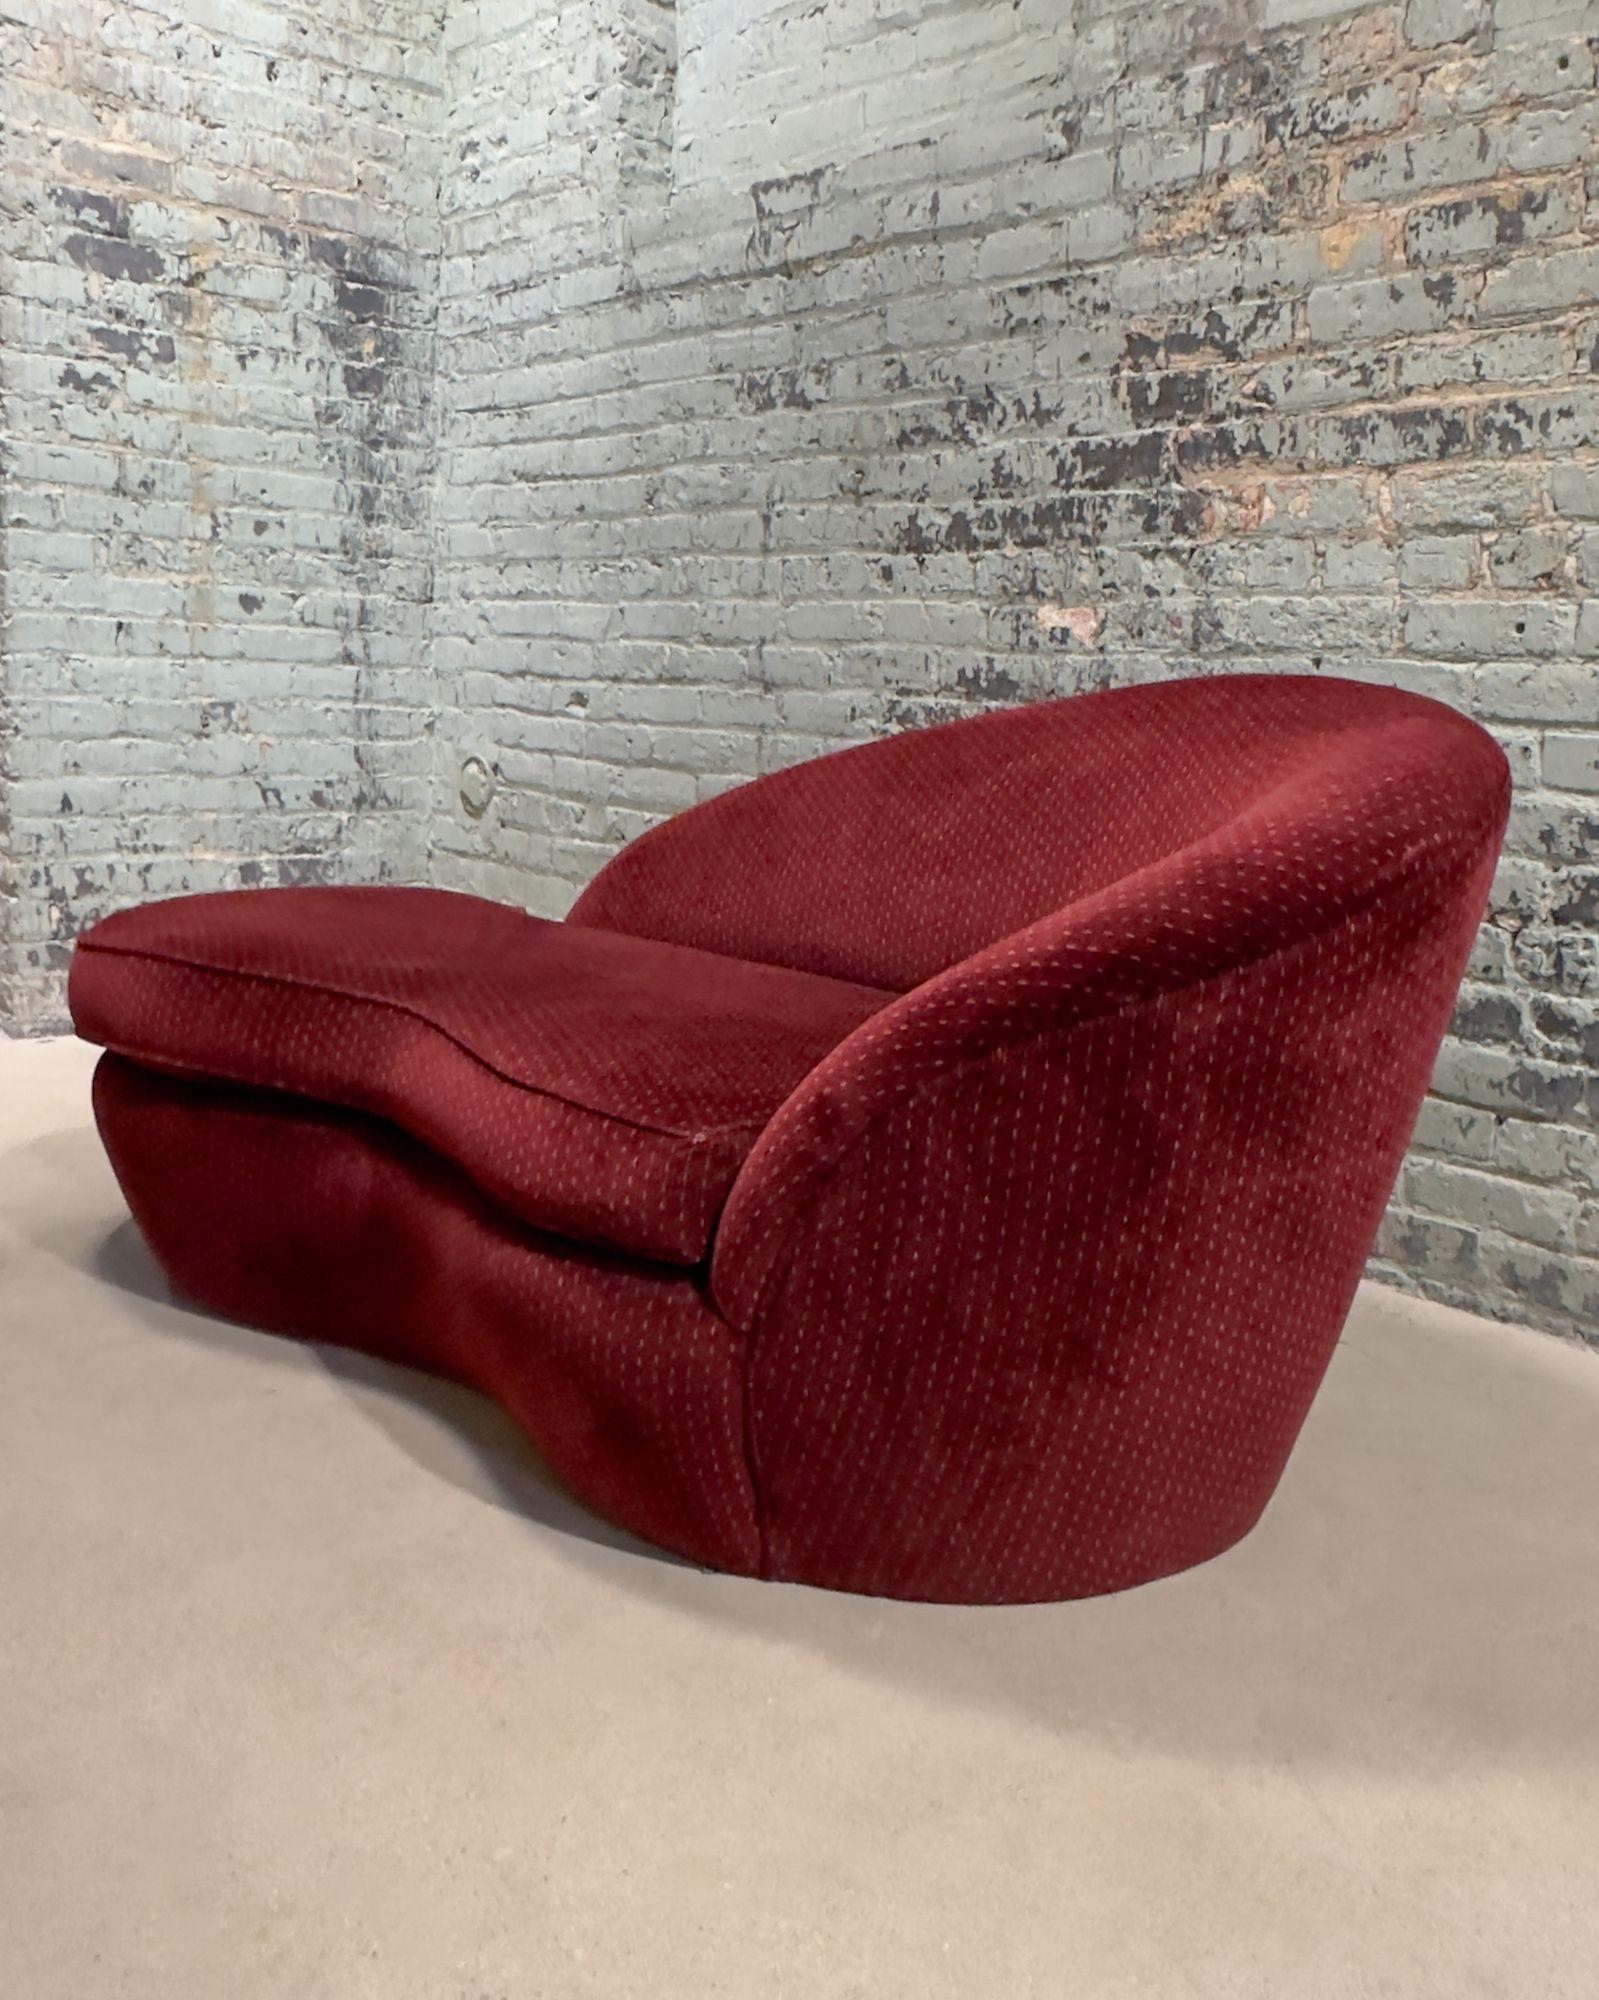 Vladimir Kagan Style Curved Chaise Lounge, 1960's. Original upholstery in a burgundy color, with no rips or tears.
Measures 65